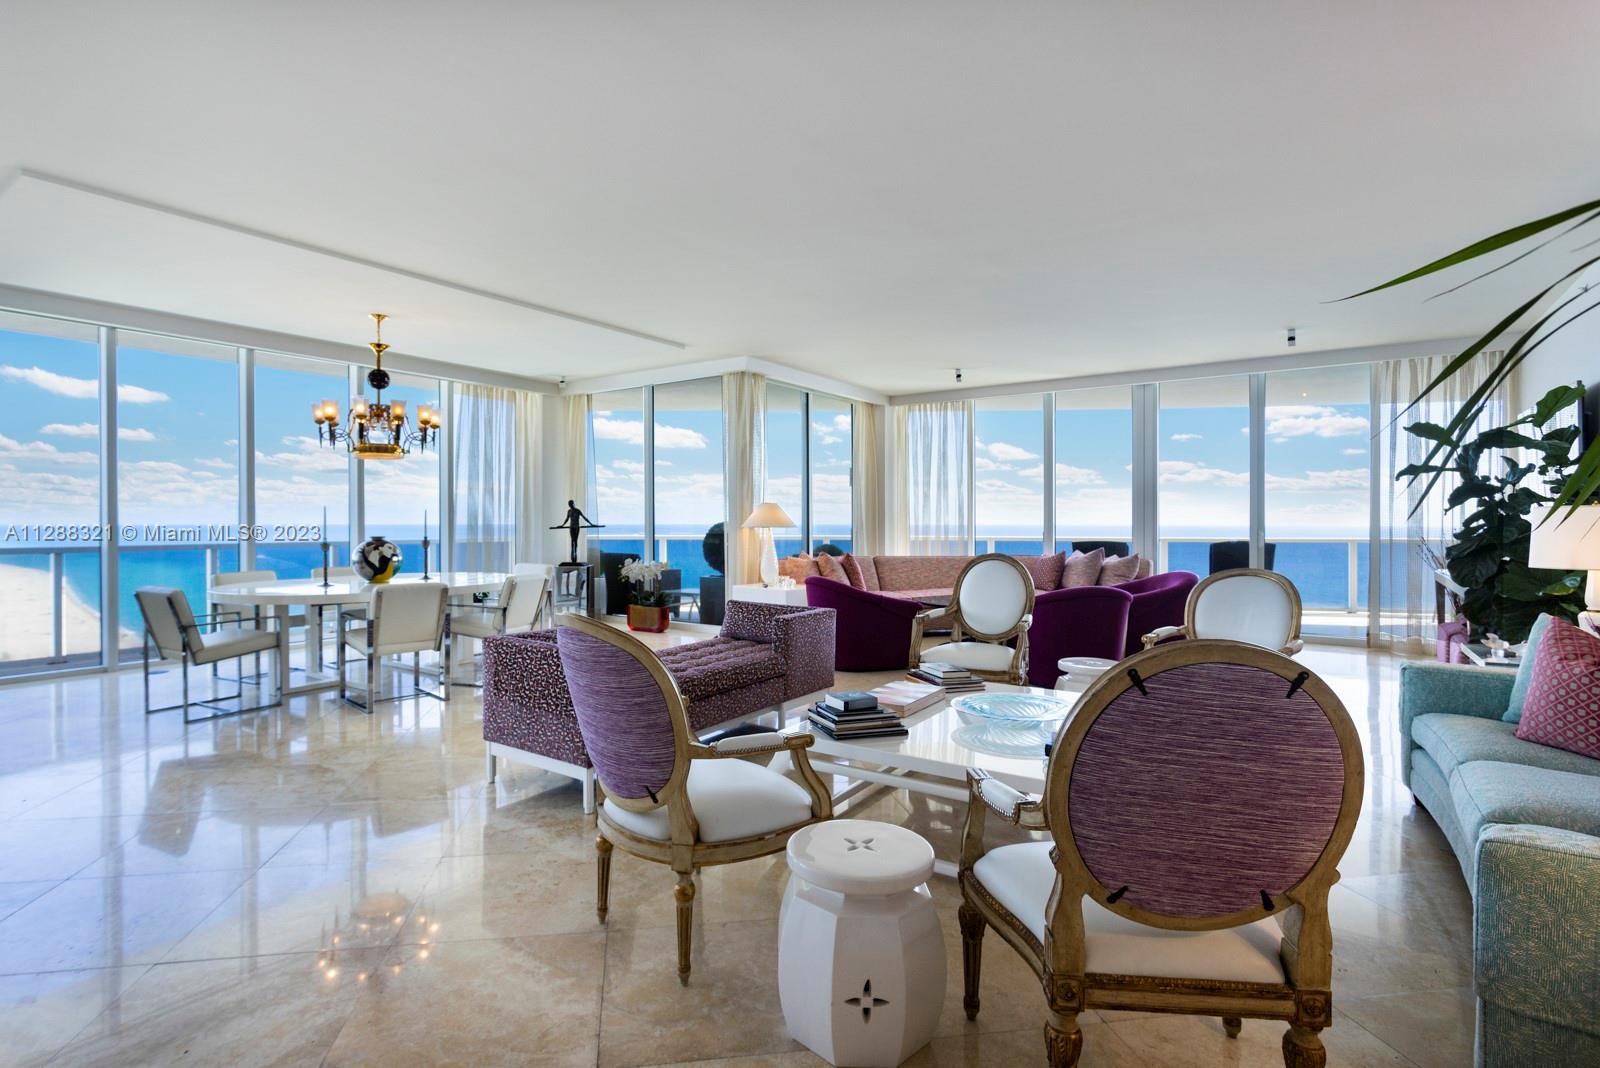 MOTIVATED SELLER!!! Elegant 21st floor residence at Bellini condominium in prestigious Bal Harbour. The private elevator entry and foyer open directly to stunning ocean views. A huge wrap around terrace has ample space for full-size outdoor lounging and dining furniture. You will absolutely love the endless direct ocean view upon entering the master suite with his and hers baths and oversized closets. An expansive living and dining room area is ideal for entertaining. This residence features several recent updates including eat-in kitchen with high-end appliances, fixtures and cabinetry, and Apure museum quality lighting. Bellini features only 4 units per floor. Bellini is centrally located along Collins Avenue and only a short distance to fine dining, shopping and houses of worship.